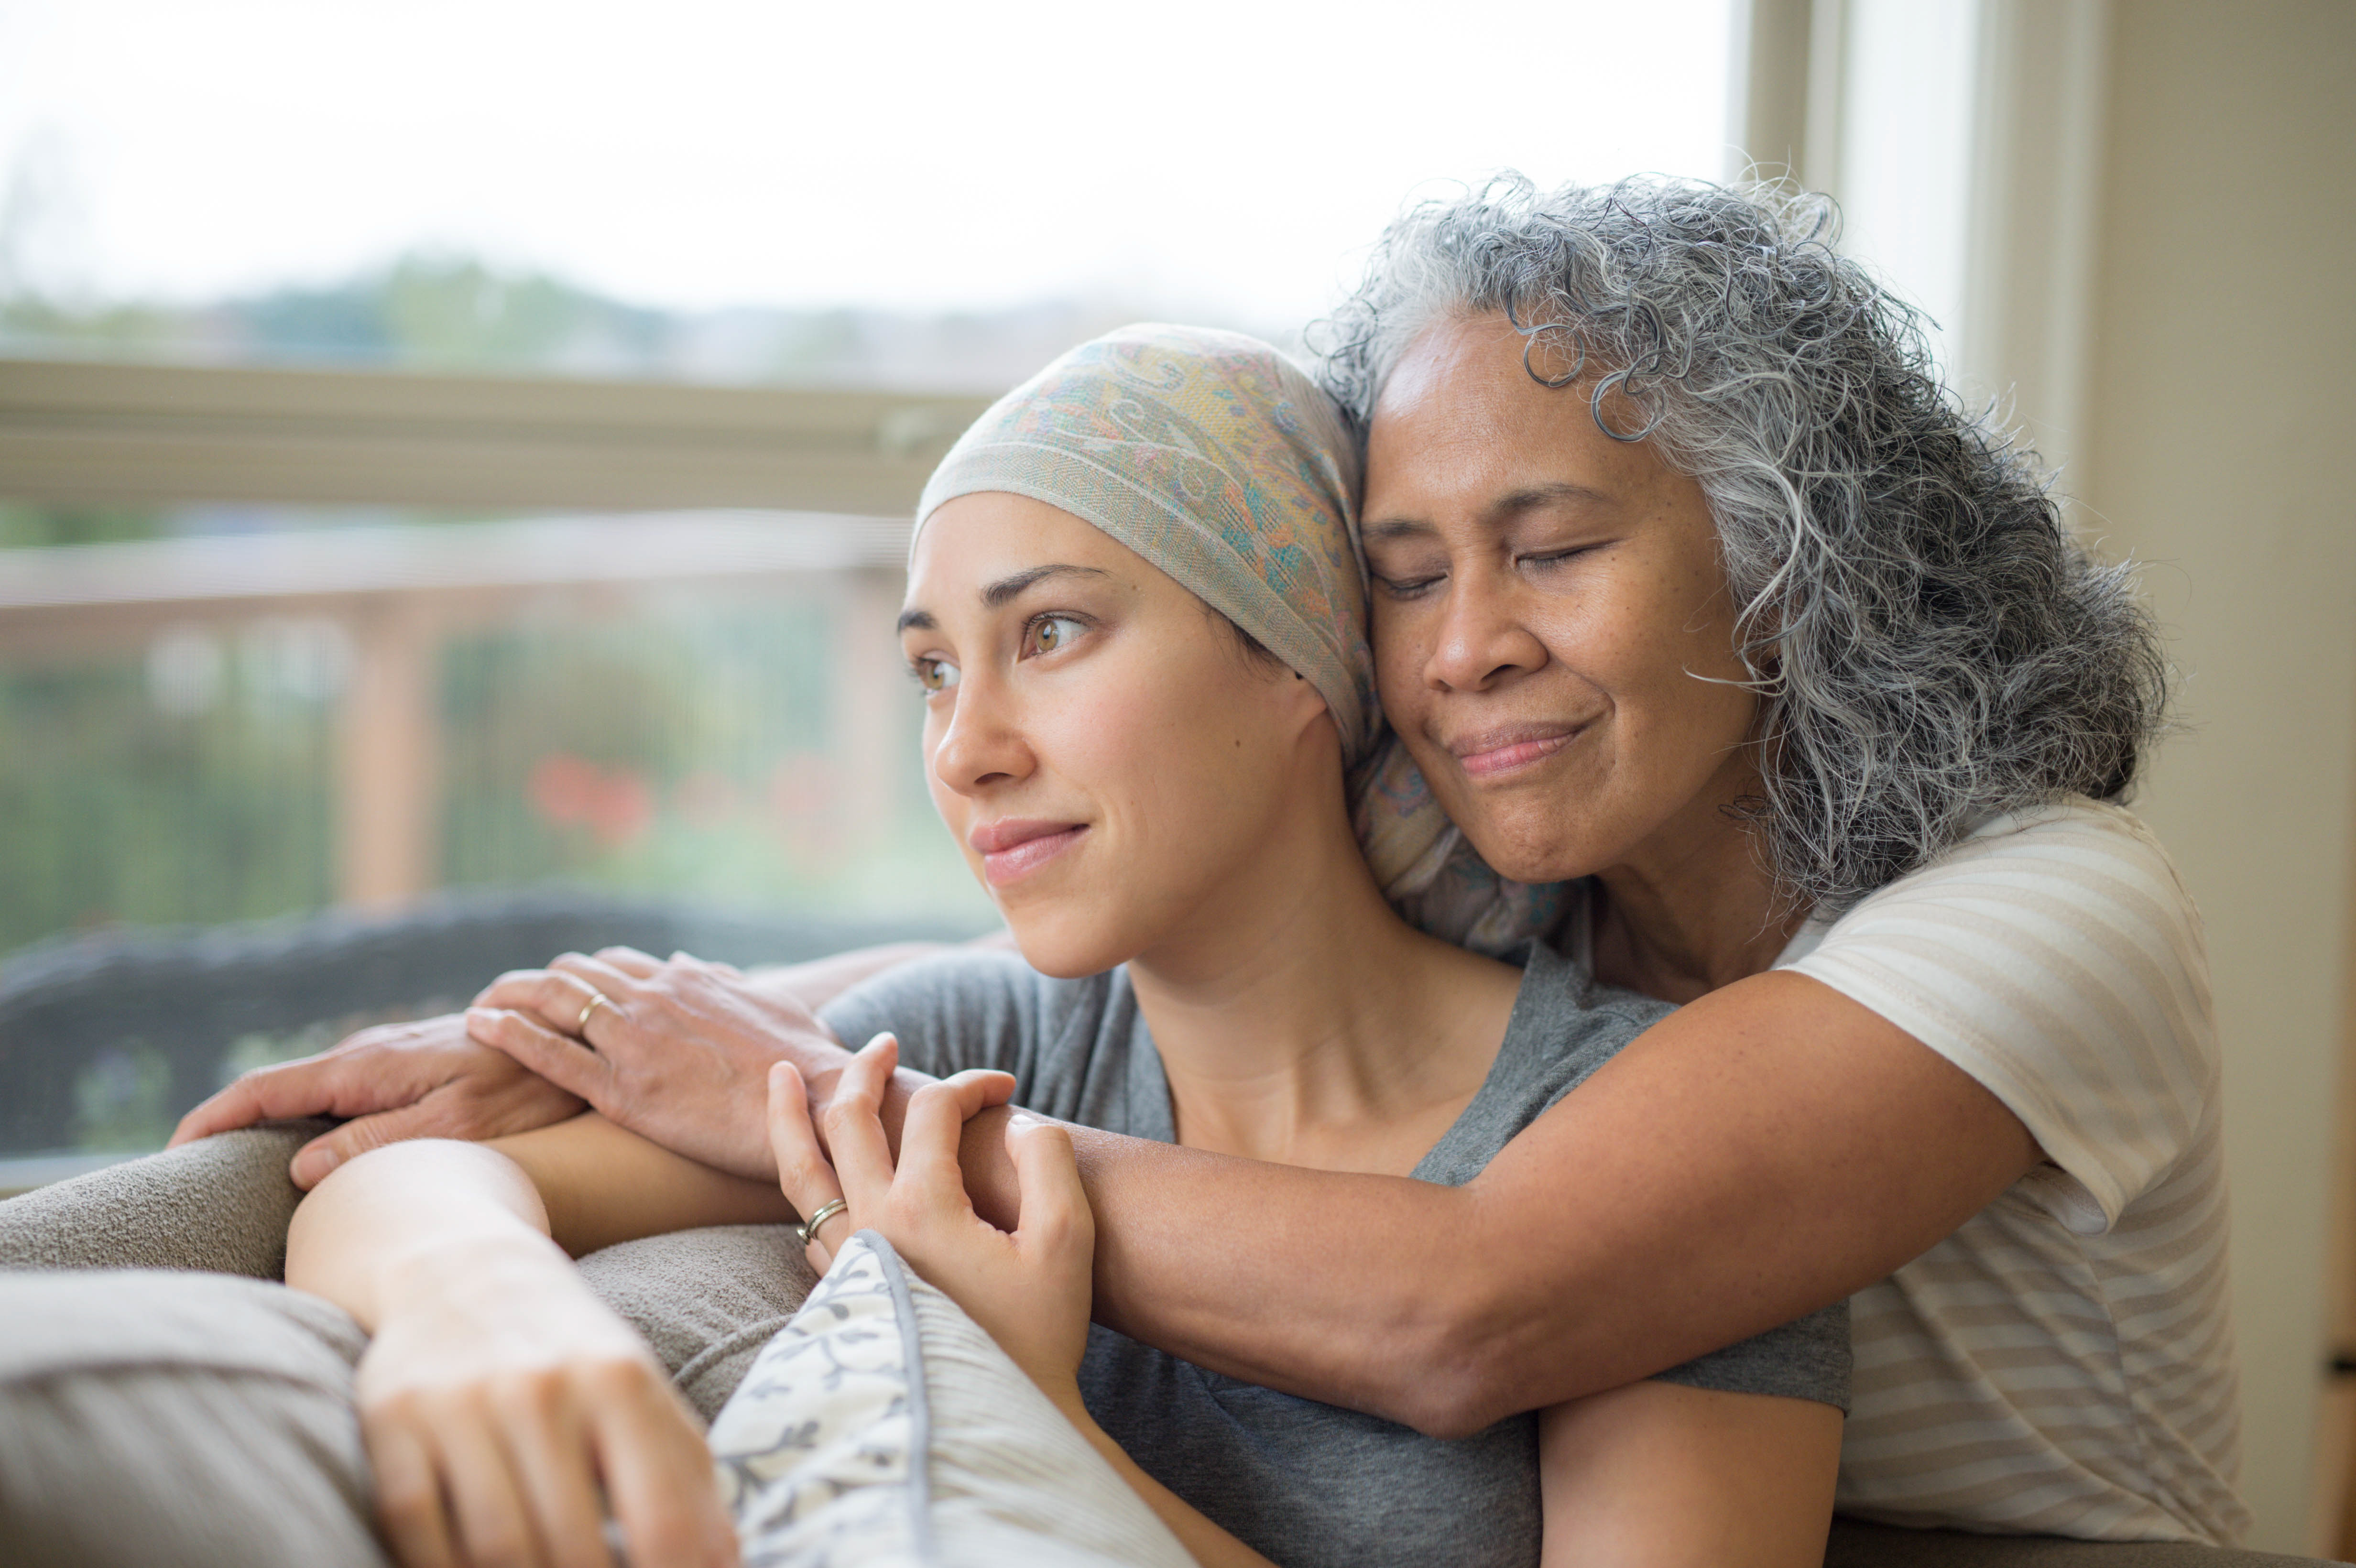 Women search women. Cancer woman. Black Caregiver. Women who Care. Cancer Patients emotions.